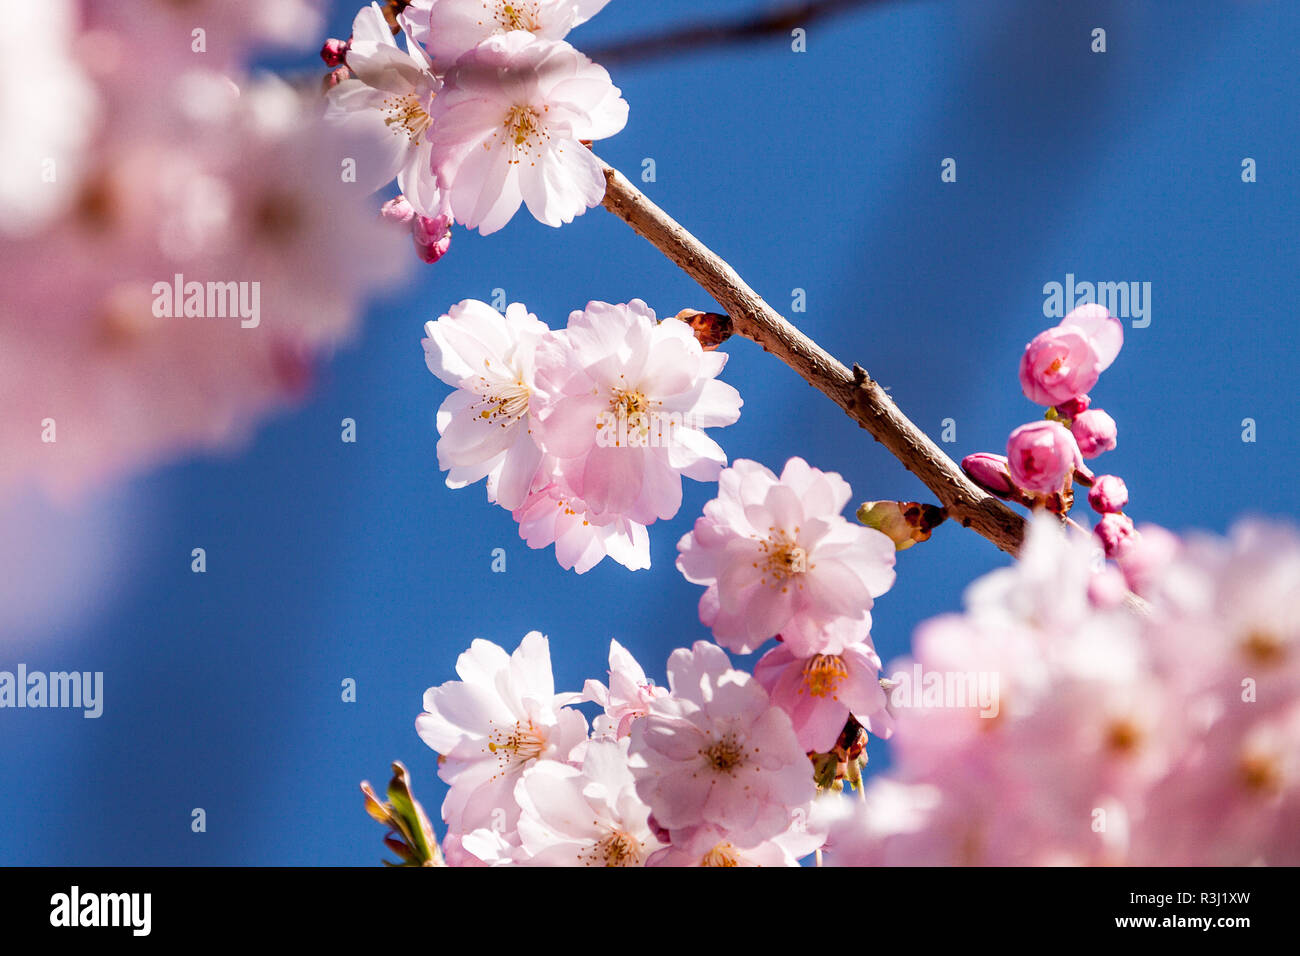 cherry blossoms on branch Stock Photo